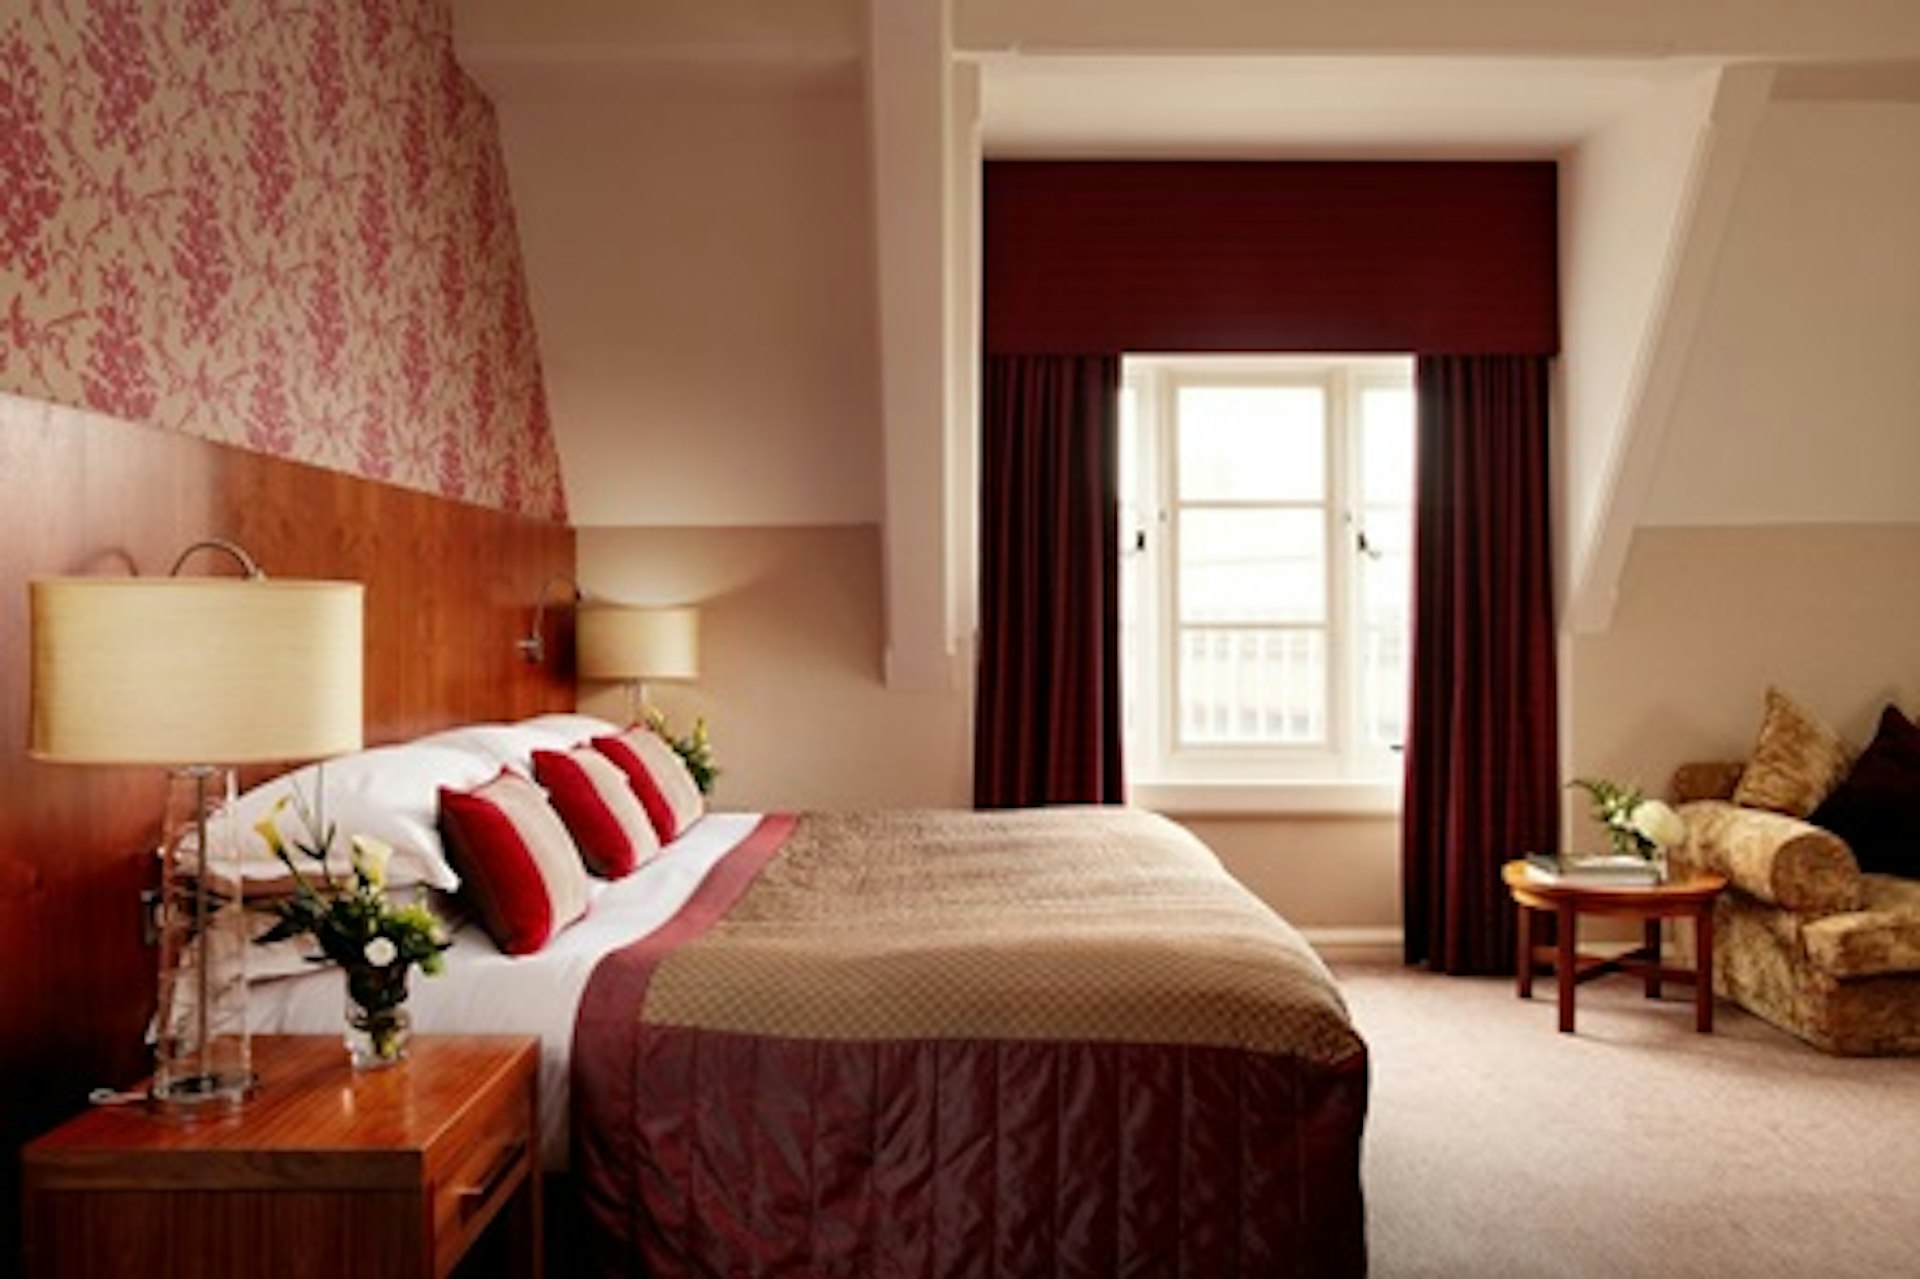 One Night Luxury Break for Two at the 5* Grand, York